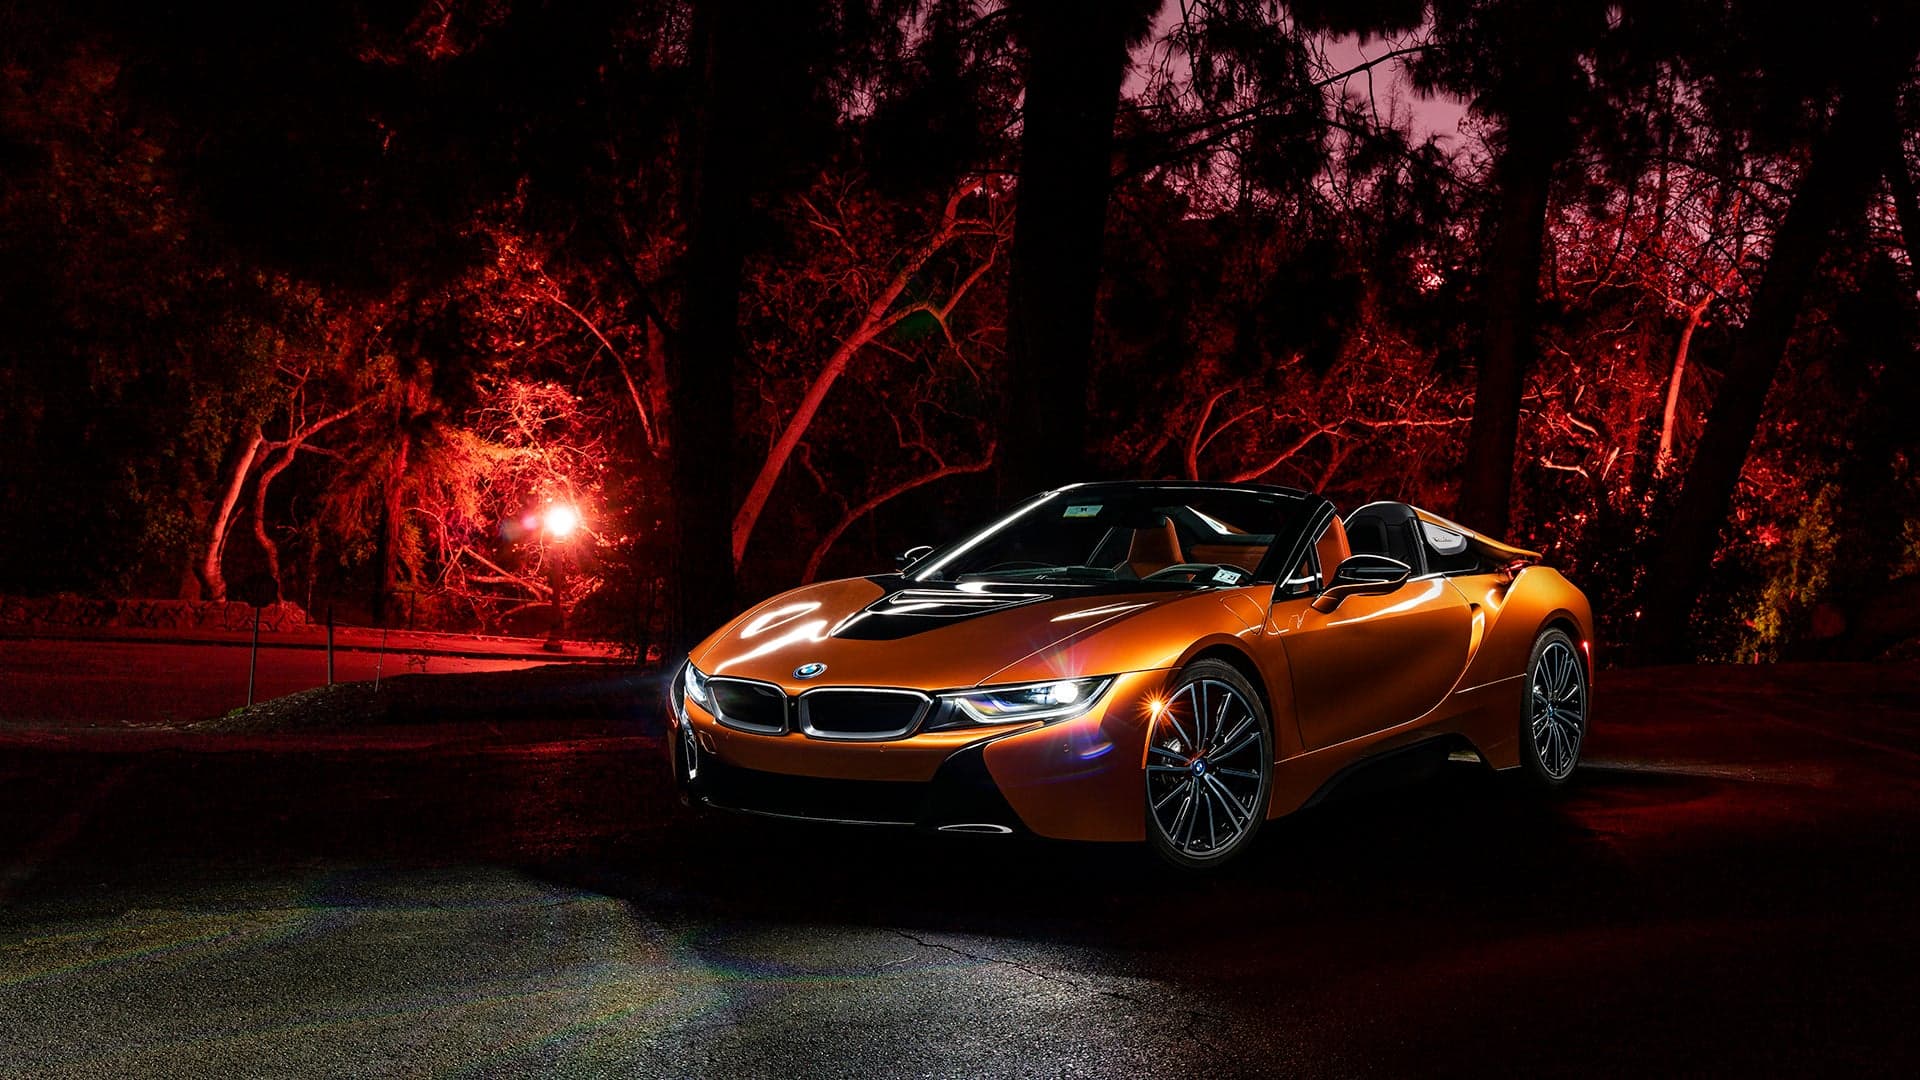 2019 BMW i8 Roadster Review: The Prettiest Walking Fish in the Automotive World